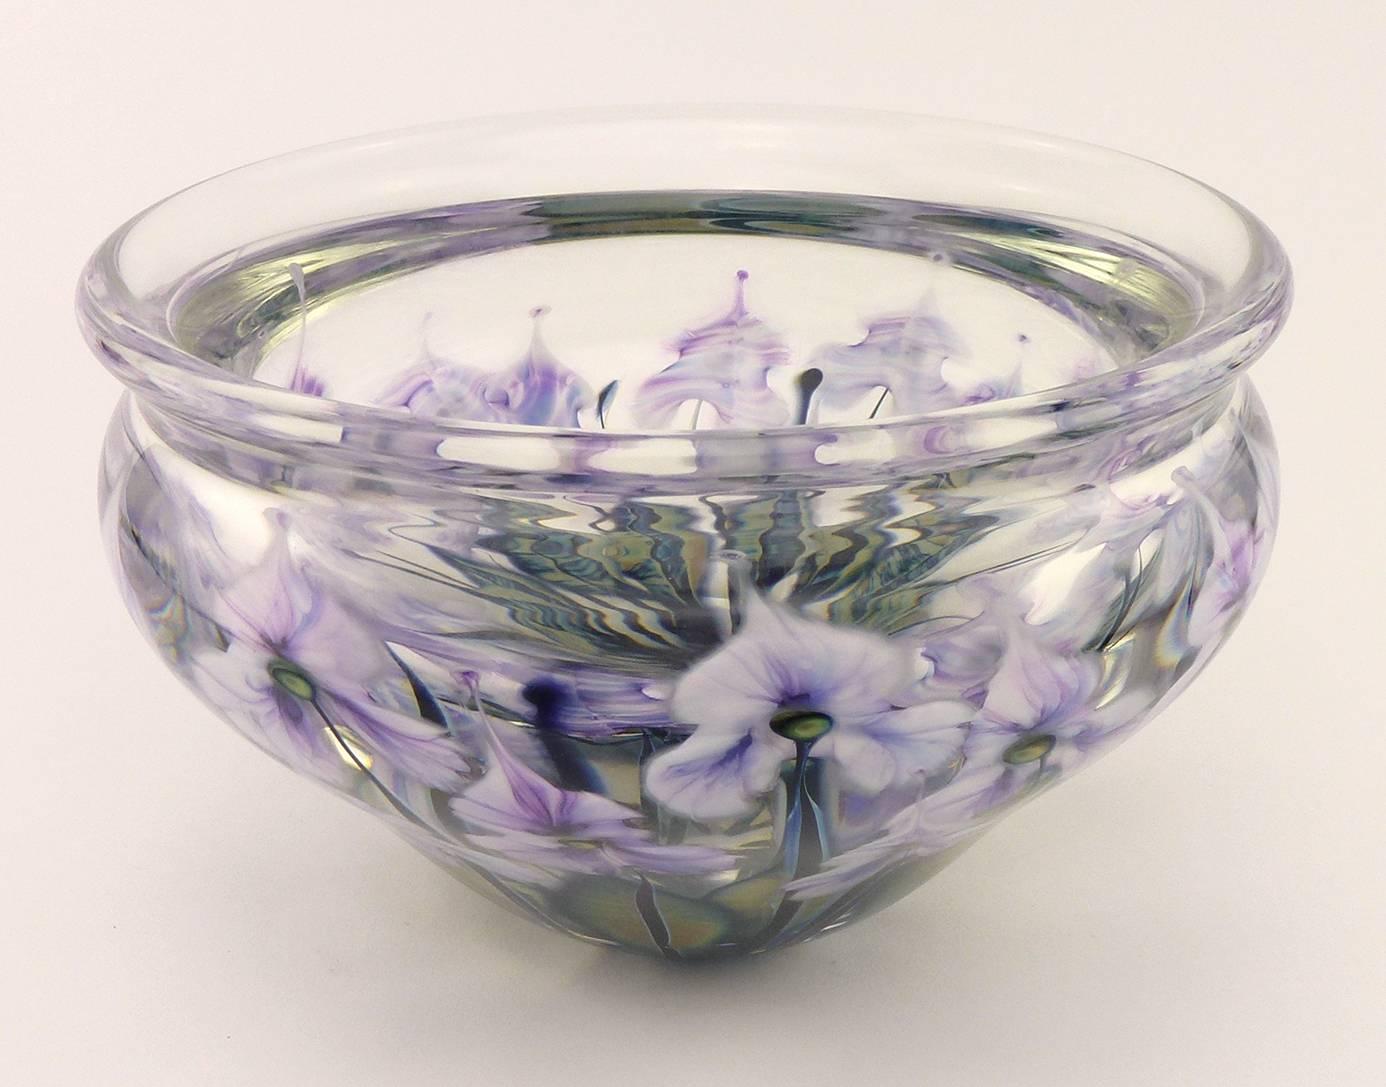 John Lotton Contemporary Studio glass blown glass bowl dated 1999, the cased, colorless glass bowl with lightly-everted mouth, waisted neck, steeply-tapering to the foot, decorated with multiple purple and white cymbydium orchids on green-yellow